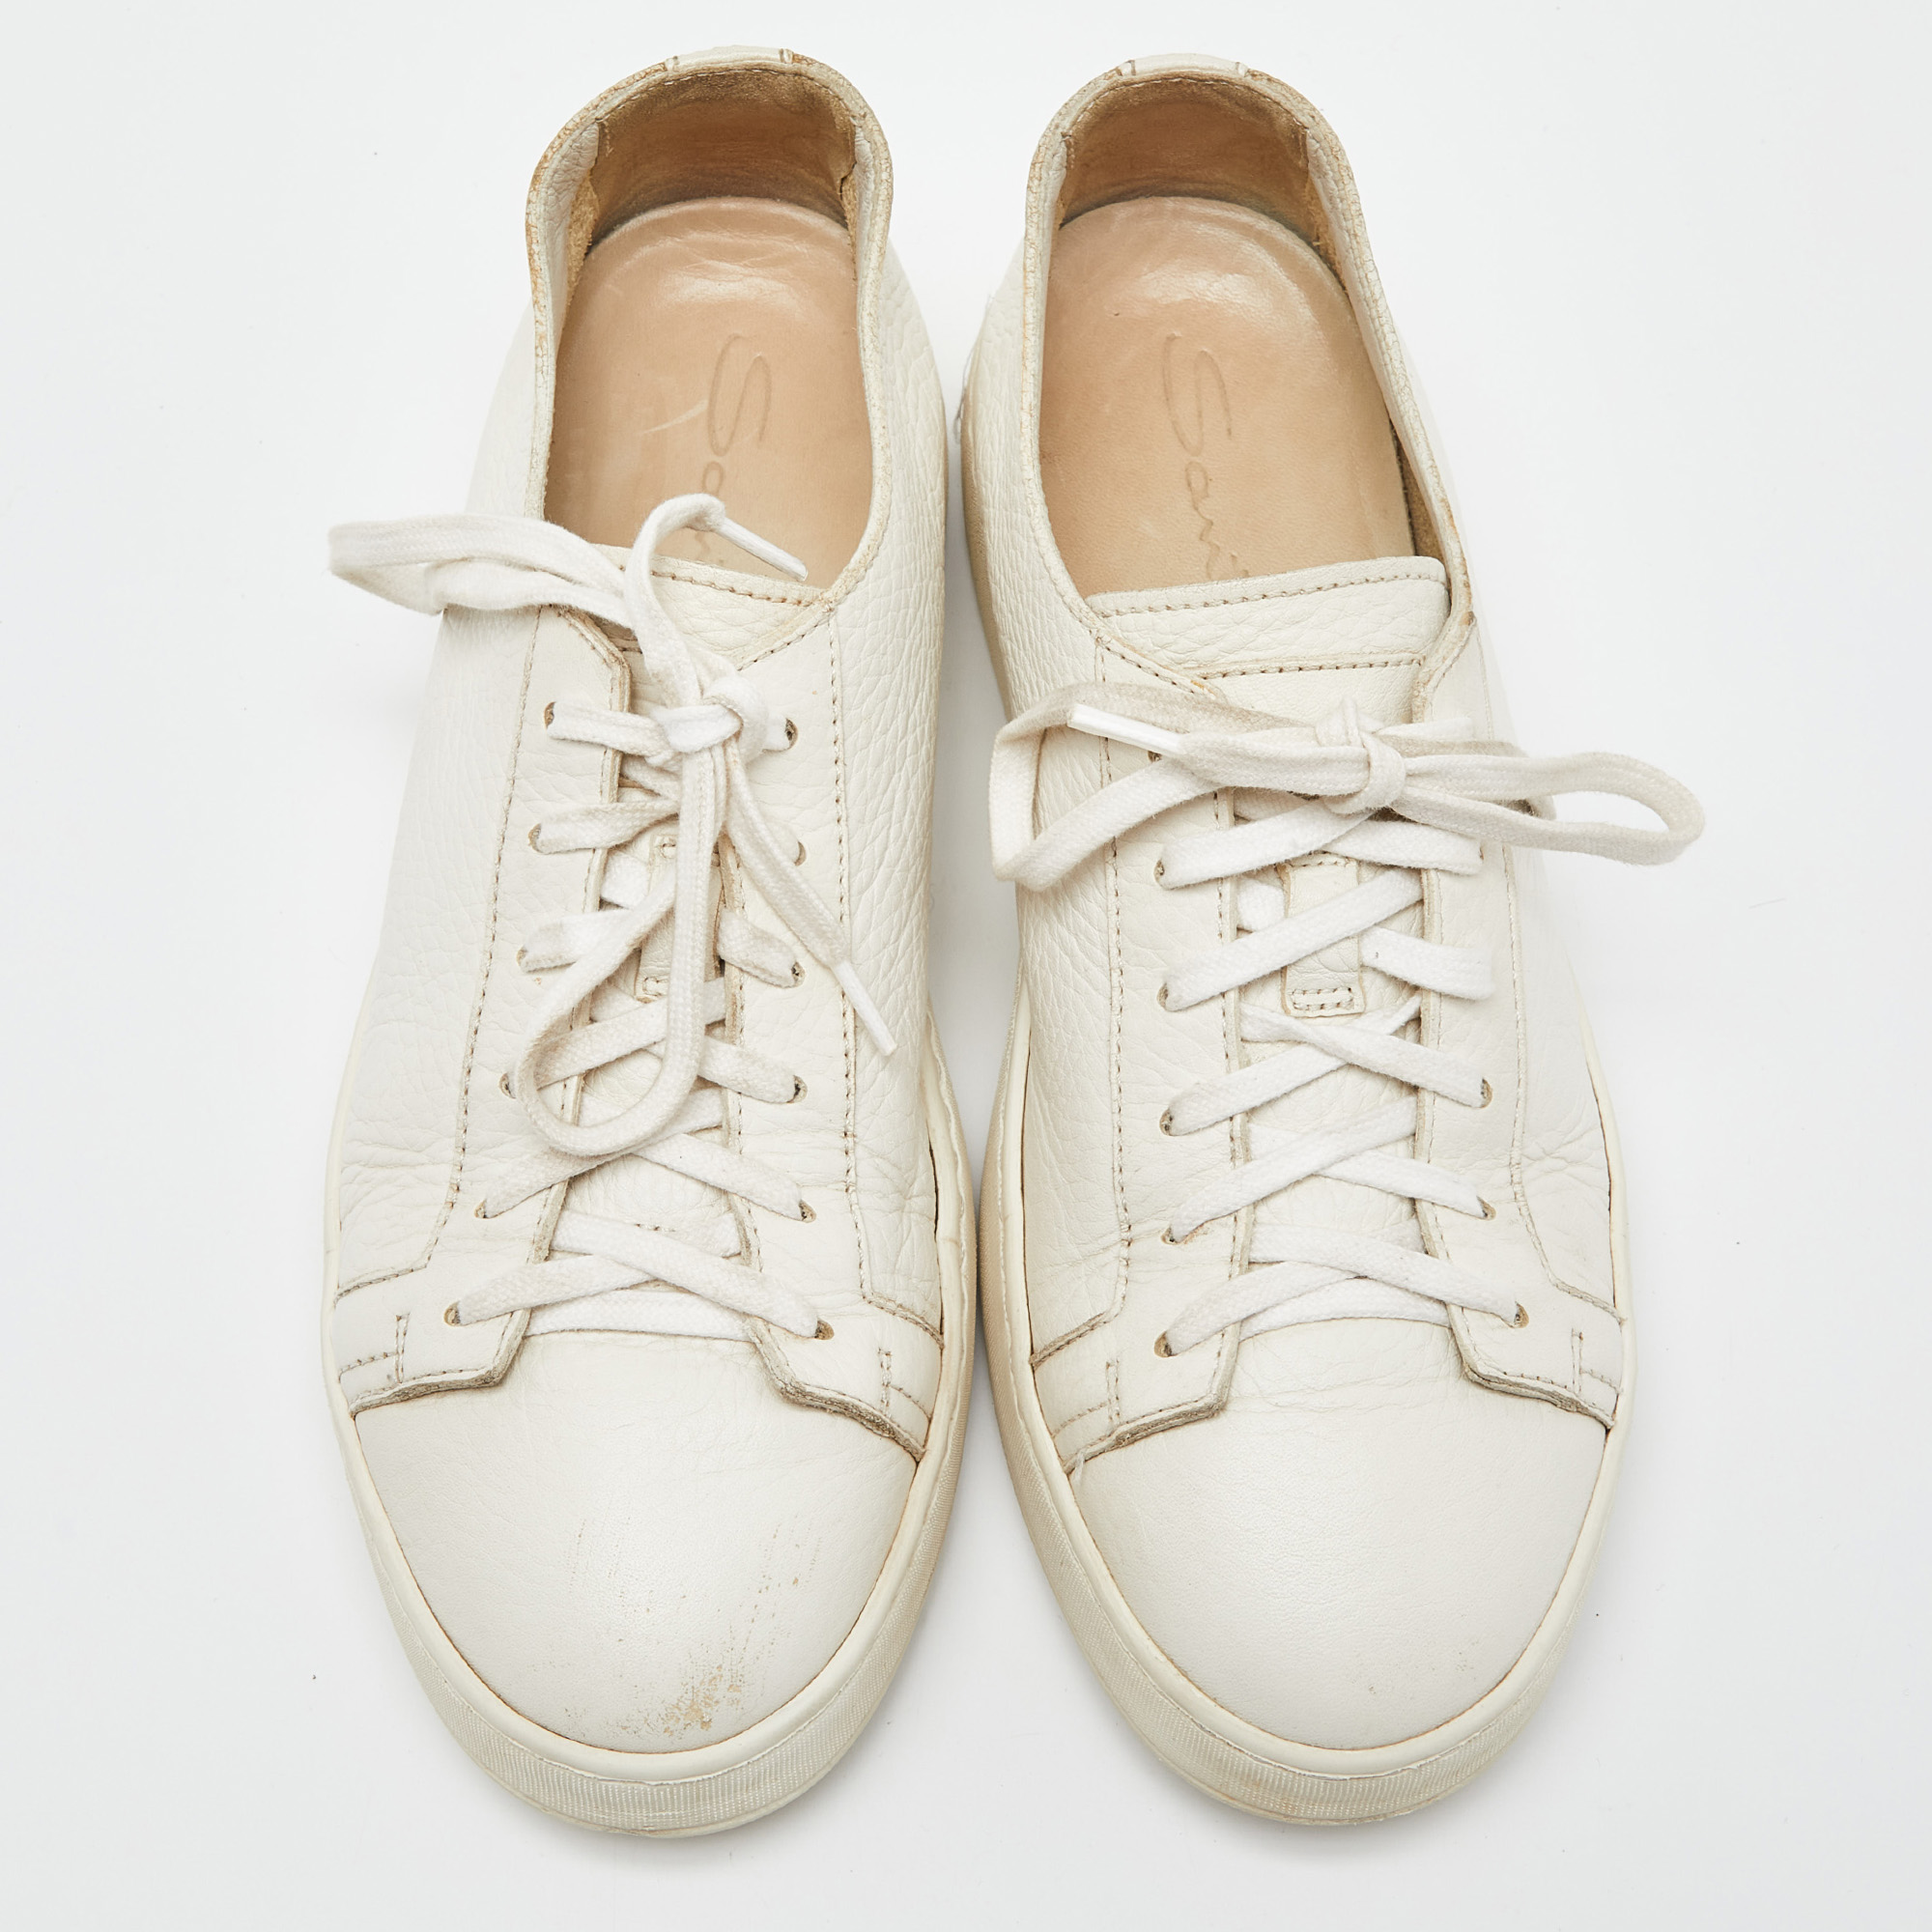 Santoni White Leather Low Top Sneakers Size 37